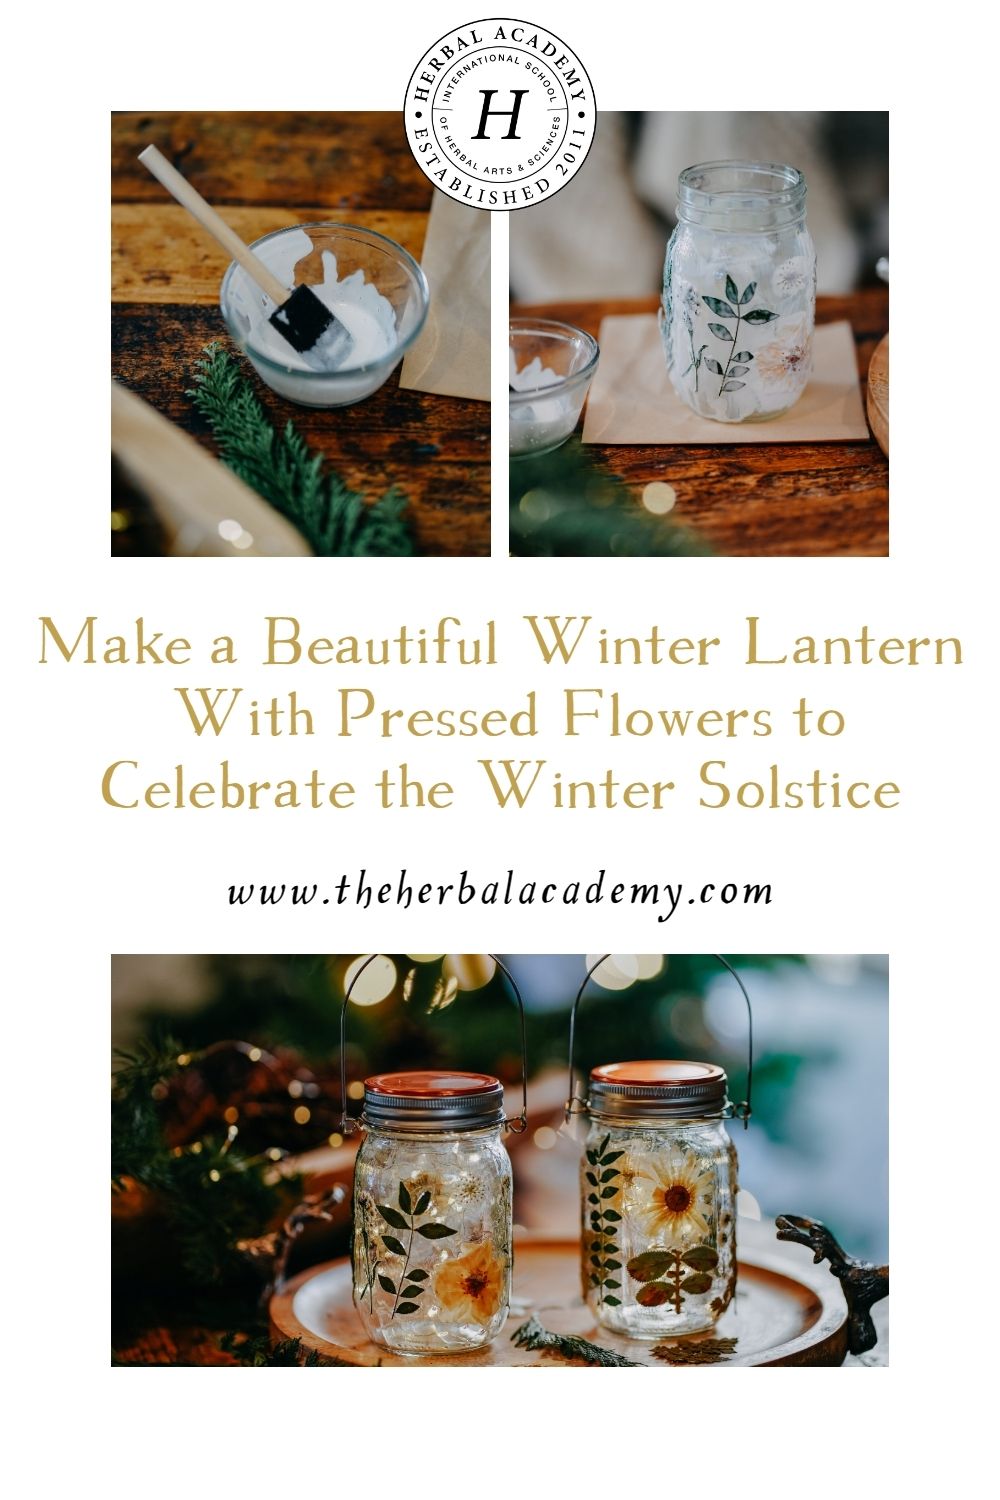 Make a Beautiful Winter Lantern With Pressed Flowers to Celebrate the Winter Solstice | Herbal Academy | Add some beautiful glow and magical ambiance to your winter solstice ritual by creating your very own pressed flower lantern.